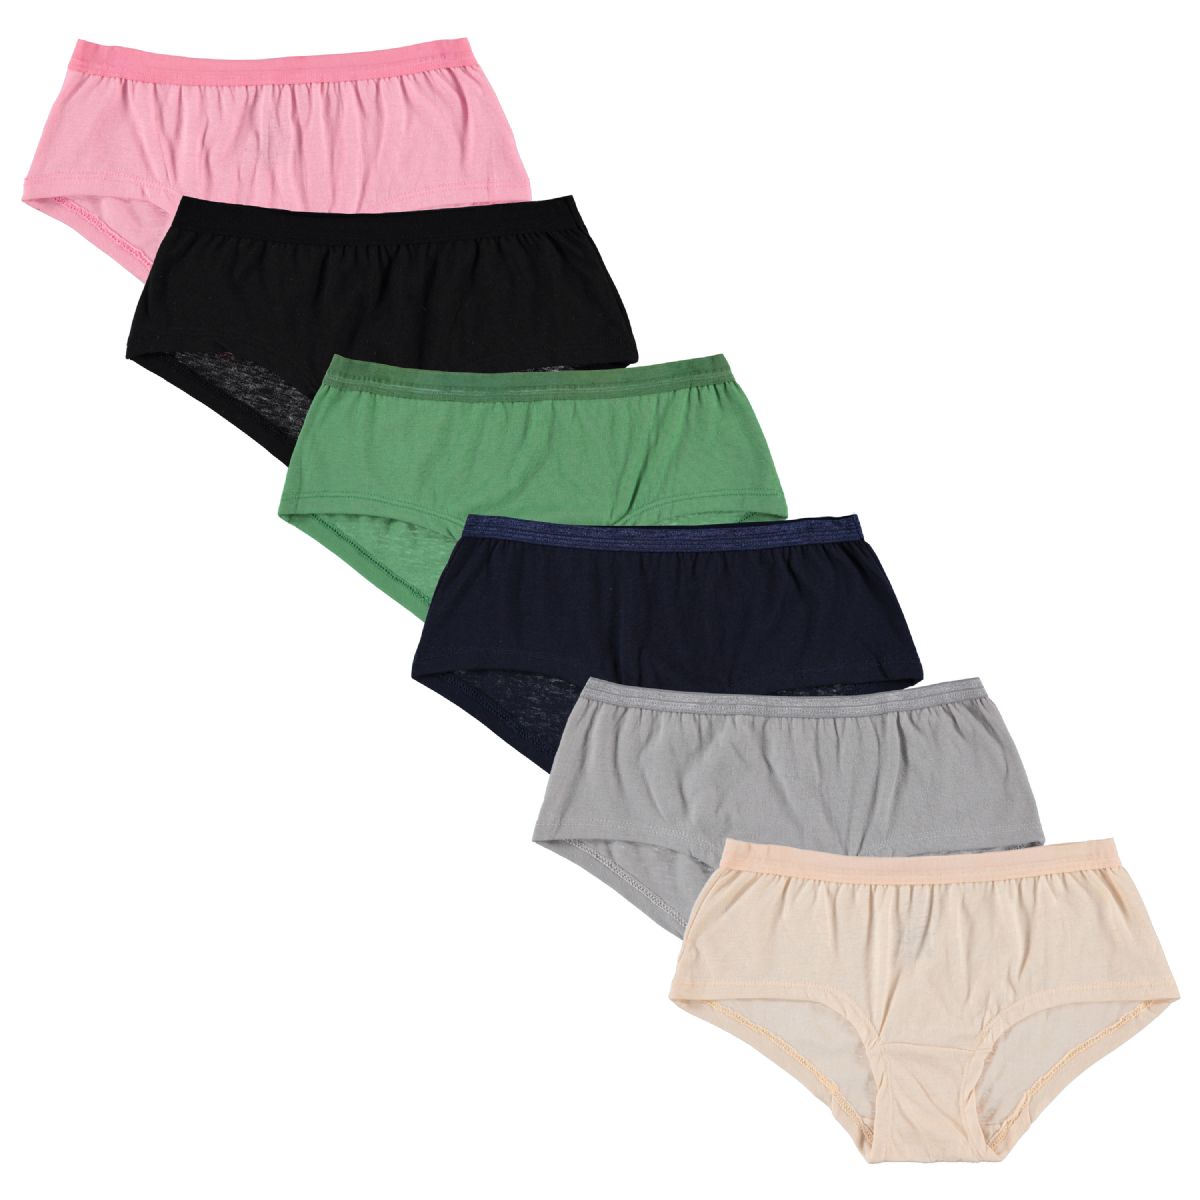 Wholesale Yacht & Smith Womens Cotton Lycra Underwear, Panty Briefs, 95%  Cotton Soft Assorted Colors, Size Large - at 